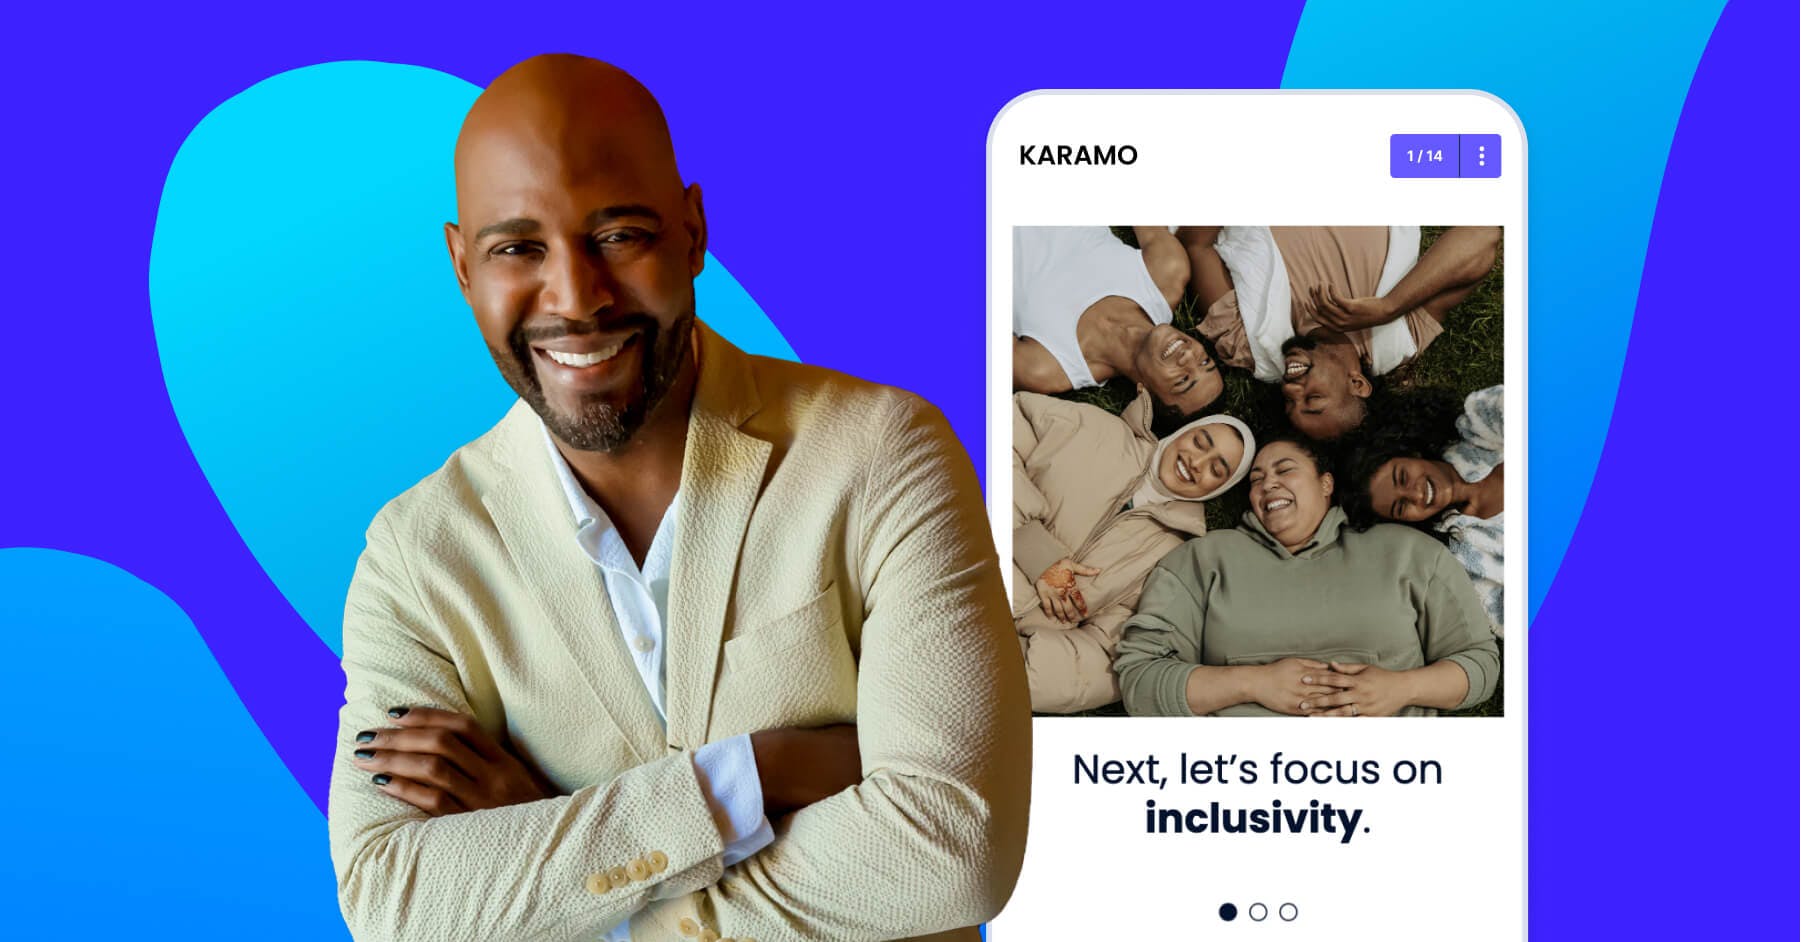 Karamo's Diversity, equity and inclusion training